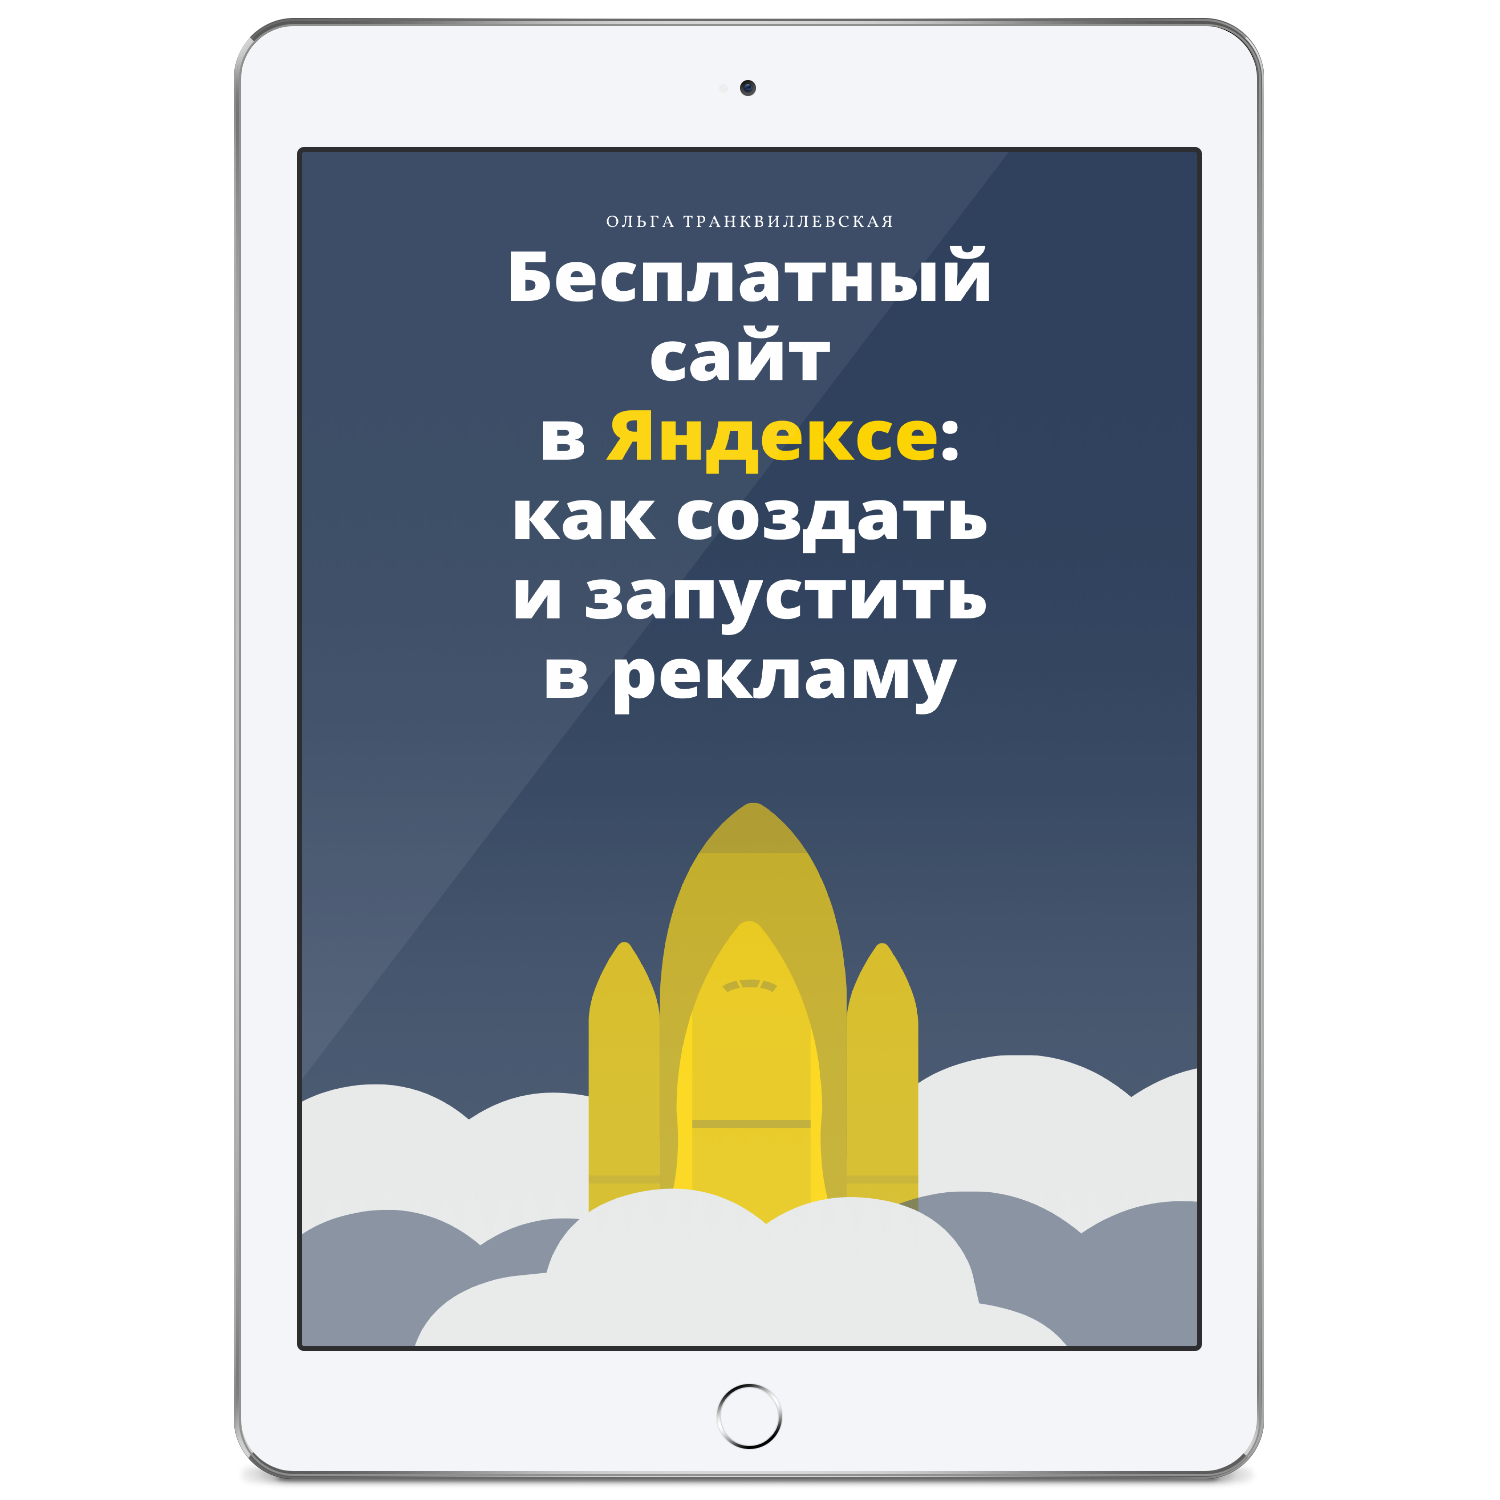 Free website in Yandex: how to create and launch in re